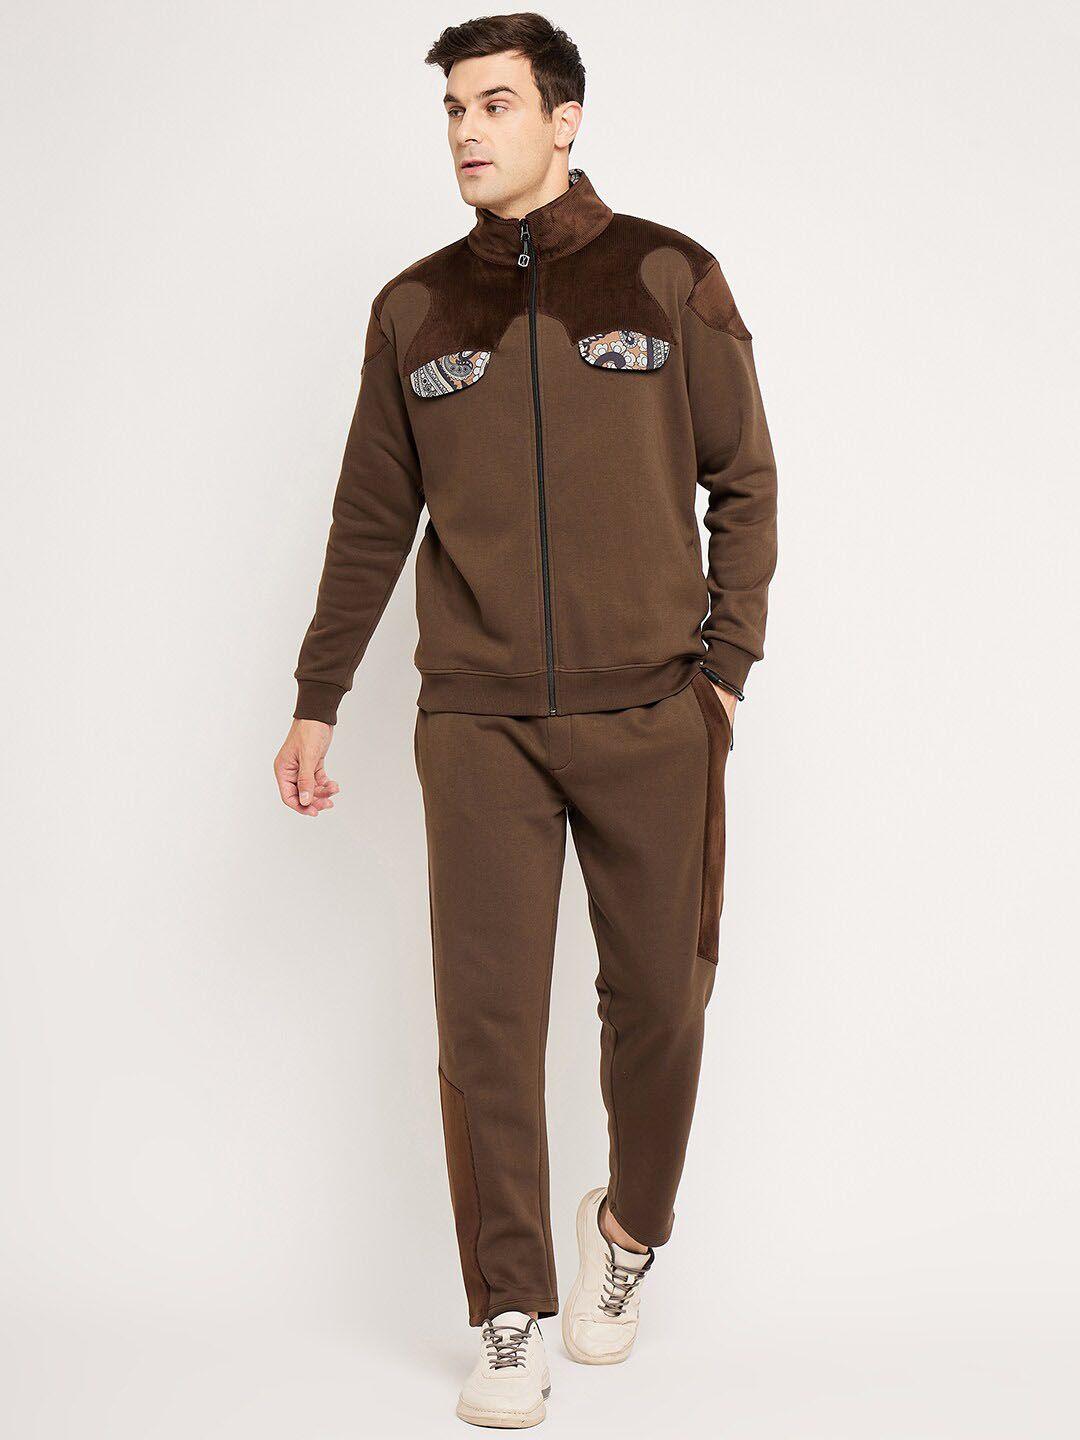 edrio printed mid-rise relaxed fit velour tracksuits